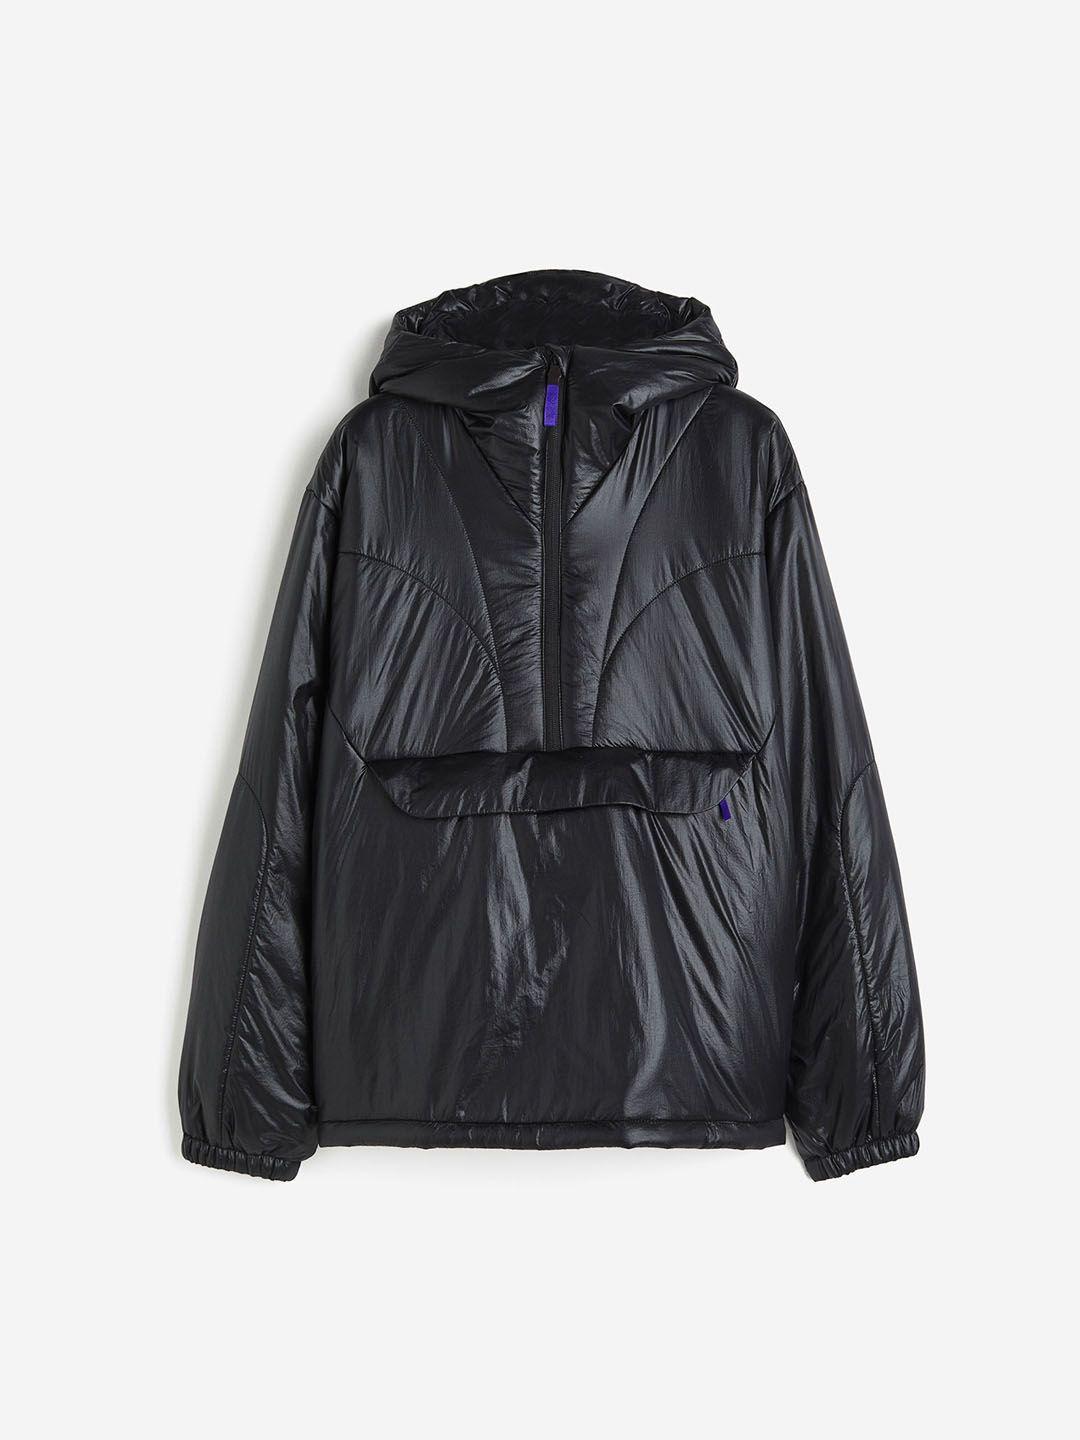 h&m thermo move quilted jackets